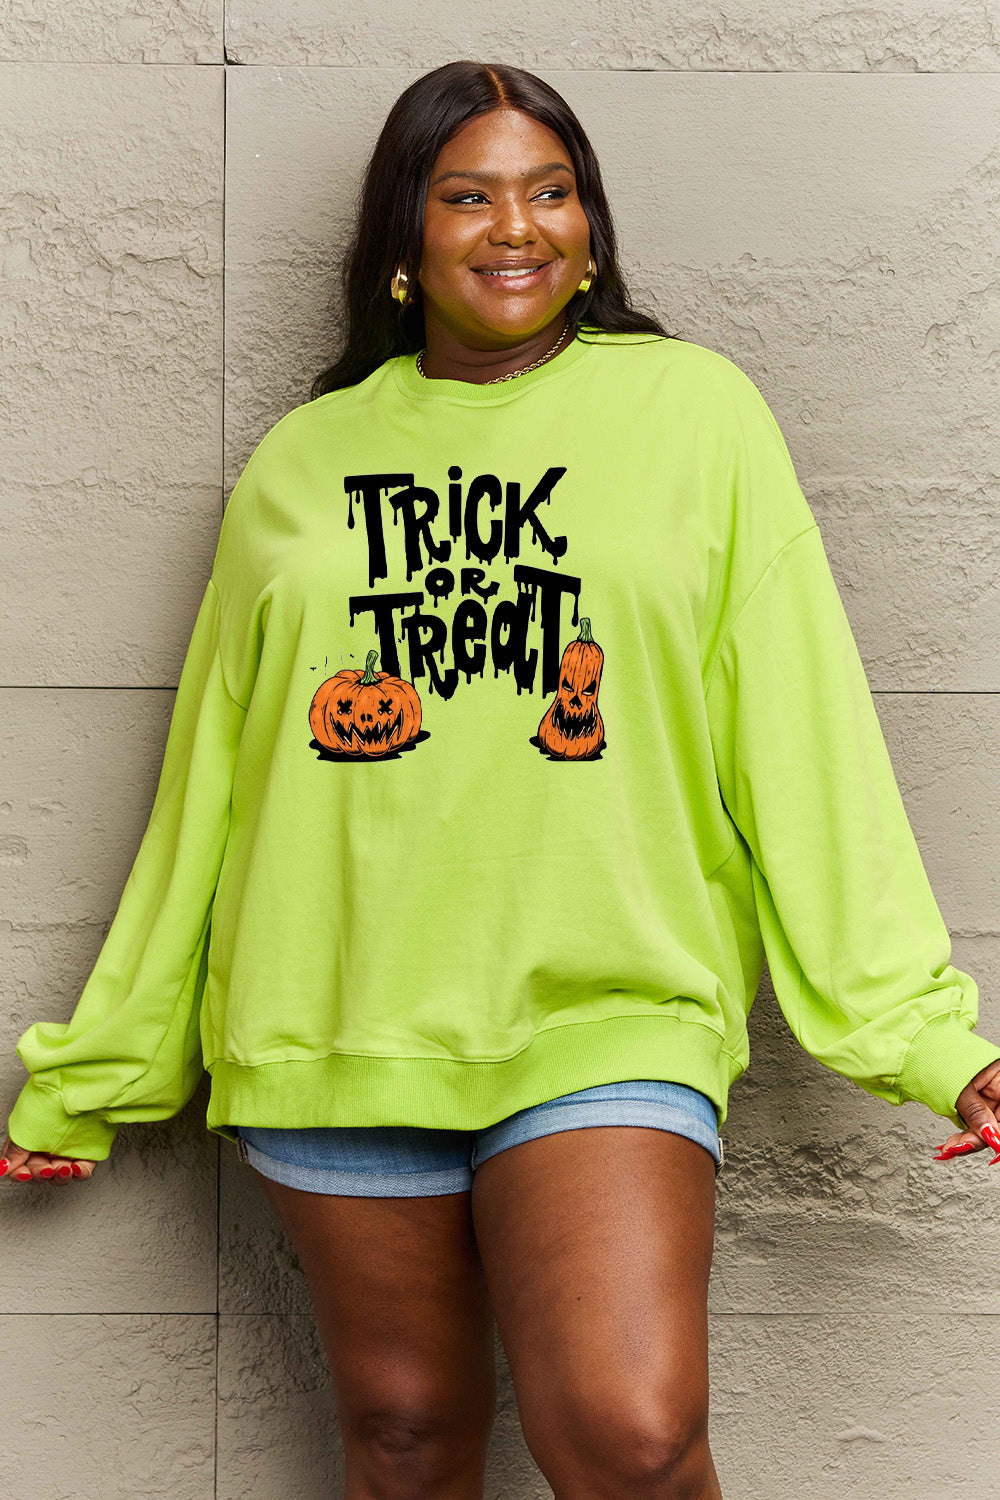 Full Size TRICK OR TREAT Graphic Sweatshirt - Green / S - T-Shirts - Shirts & Tops - 7 - 2024